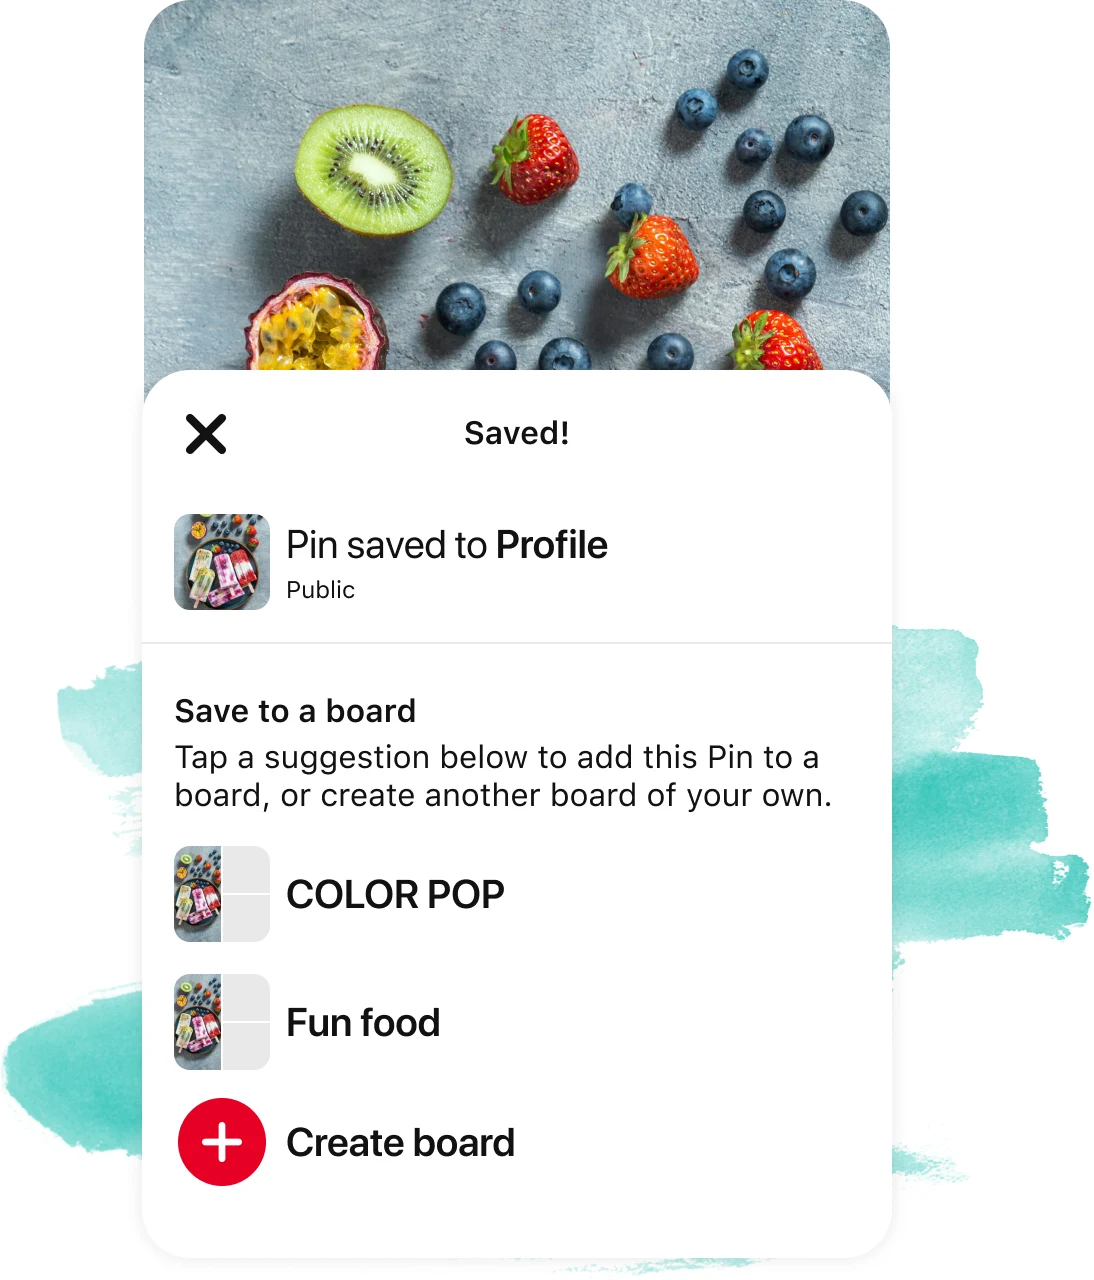 Pop up alert showing pin saved to board over top berry pin